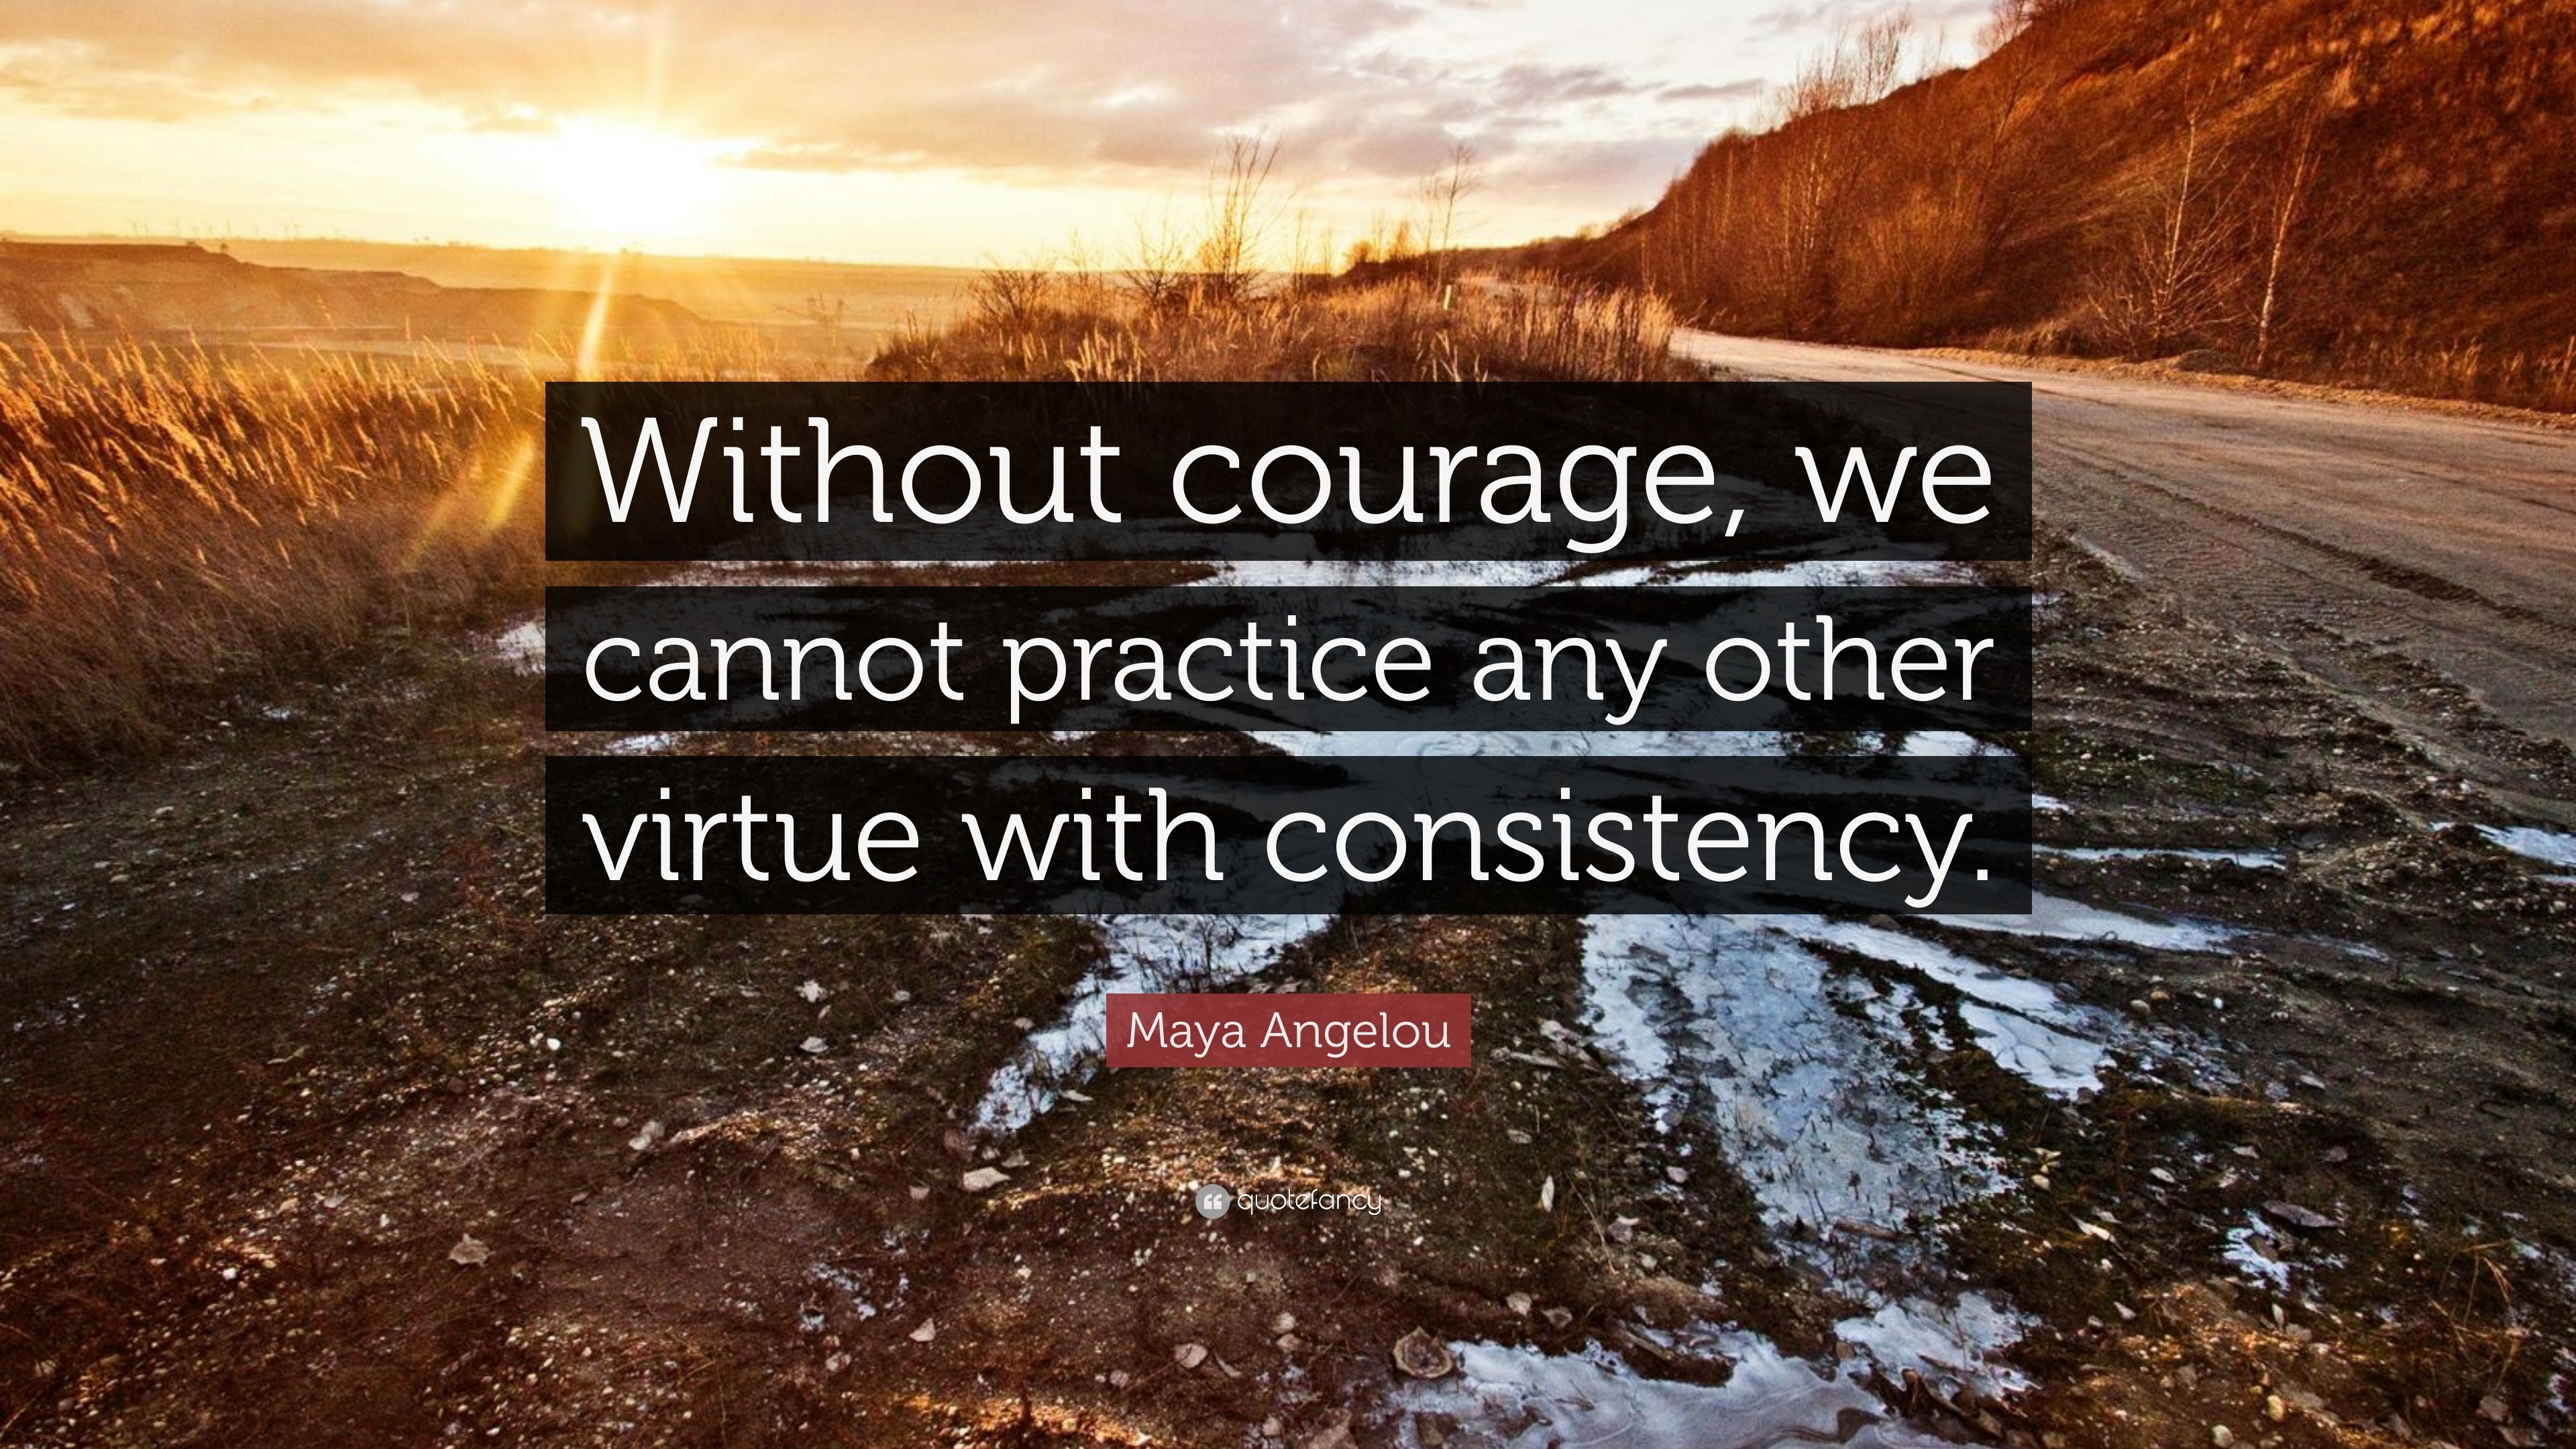 Maya Angelou Quote: “Without courage, we cannot practice any other ...